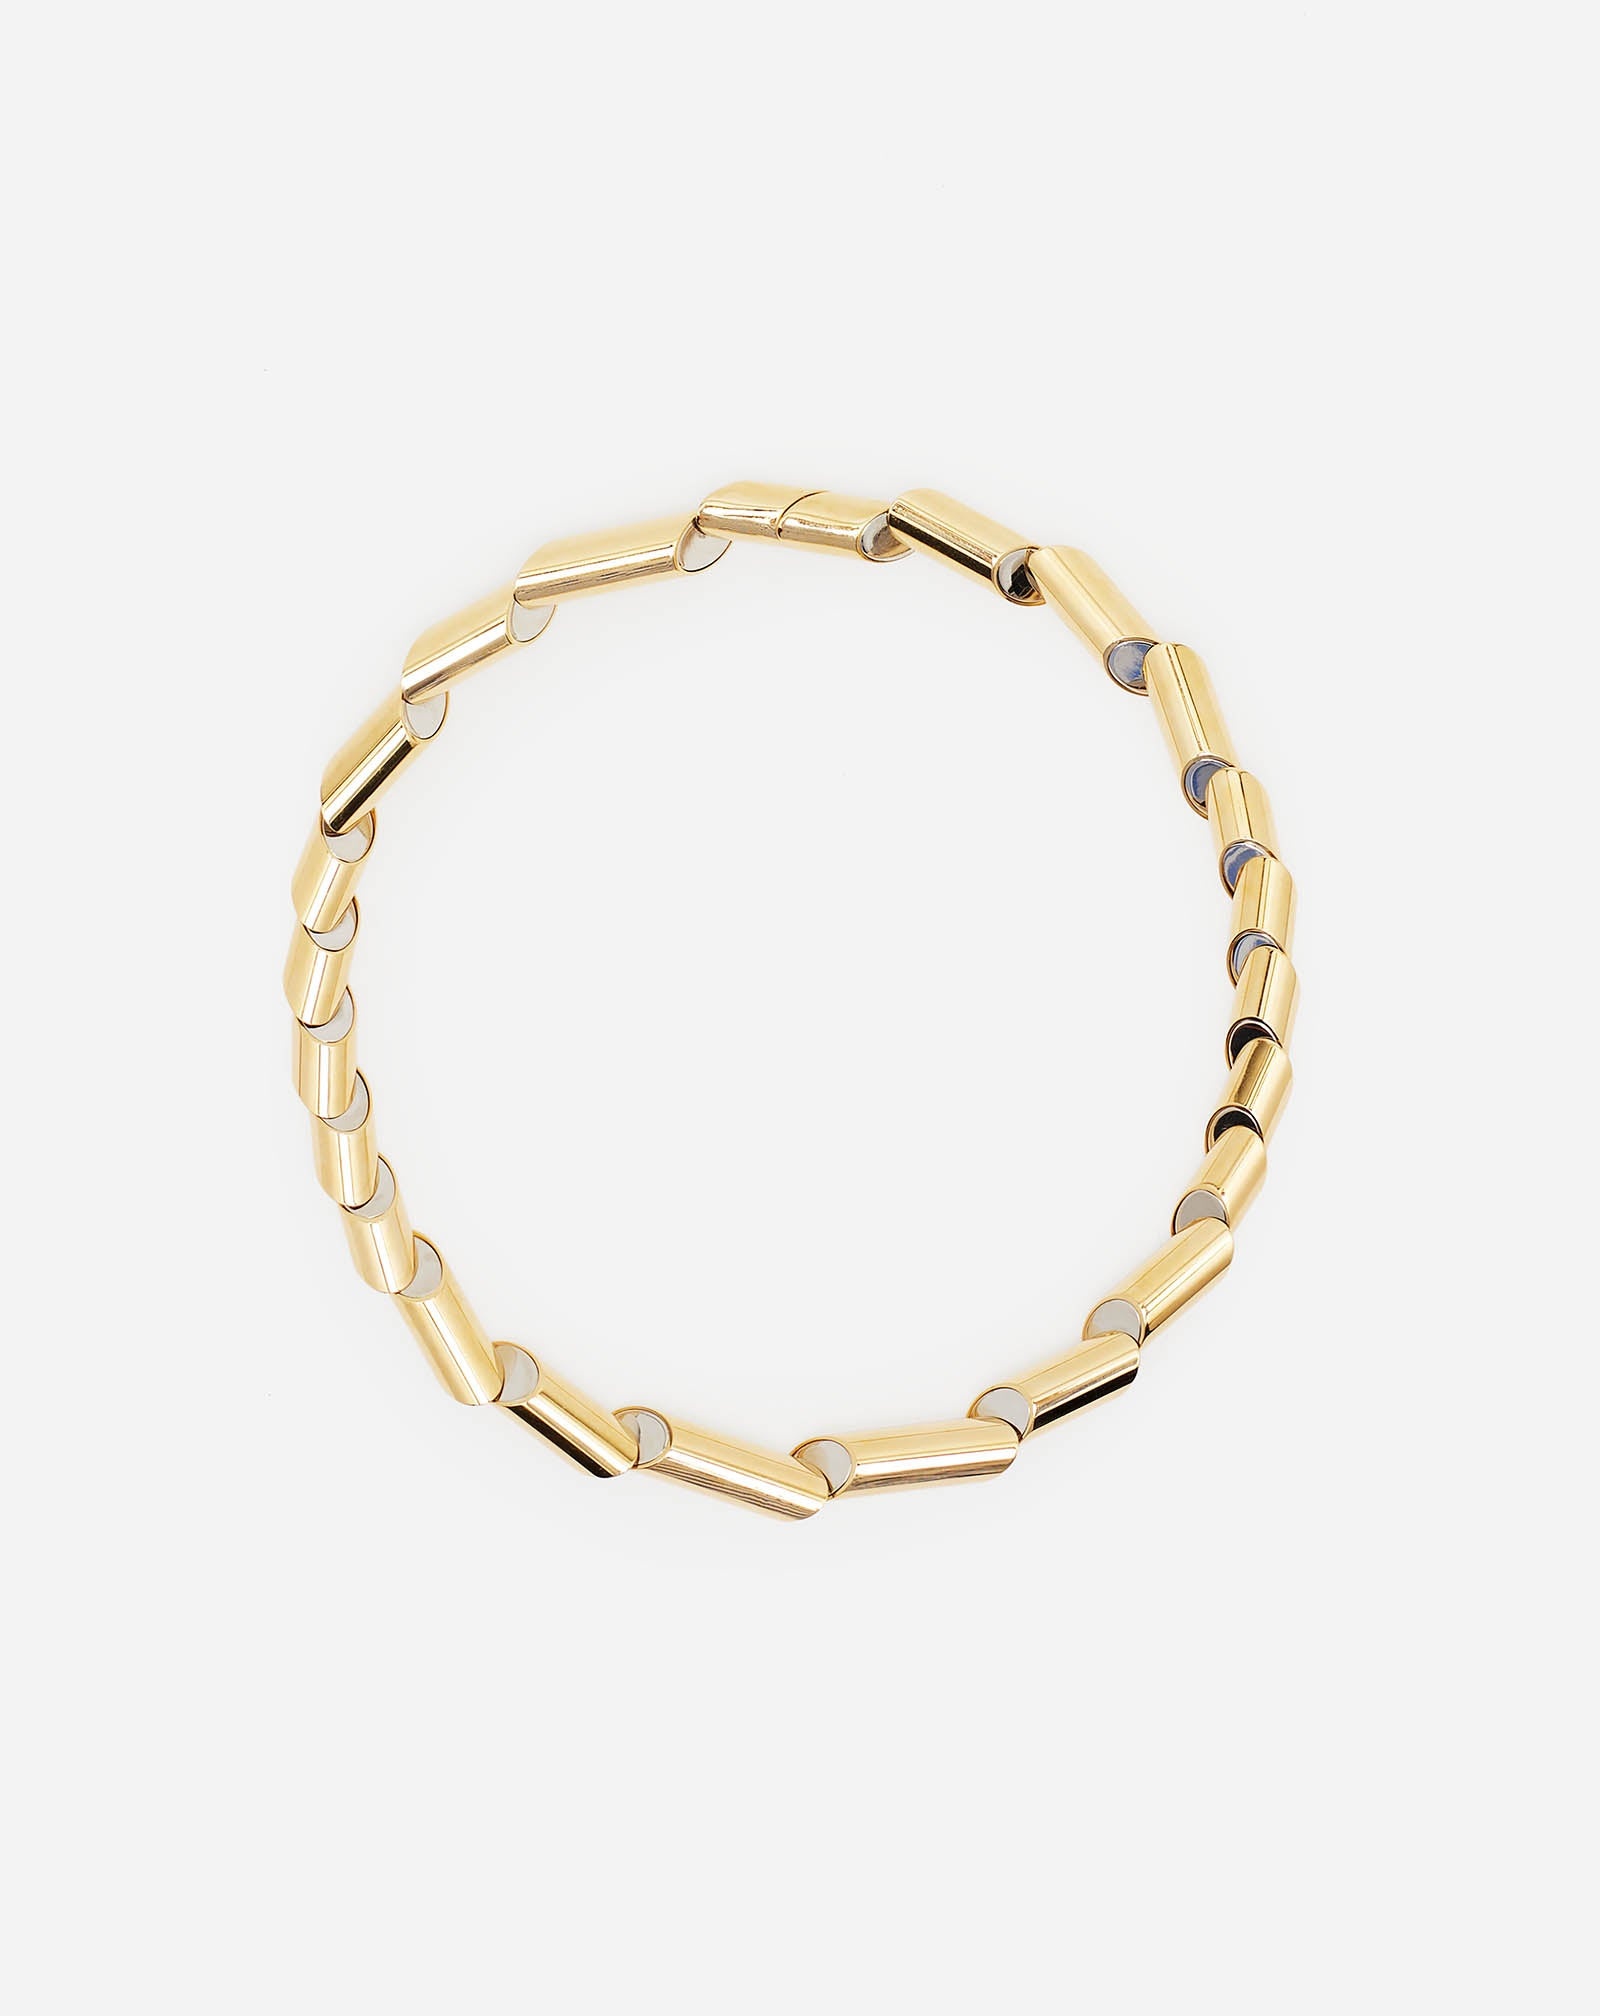 SEQUENCE BY LANVIN CHOKER NECKLACE - 4